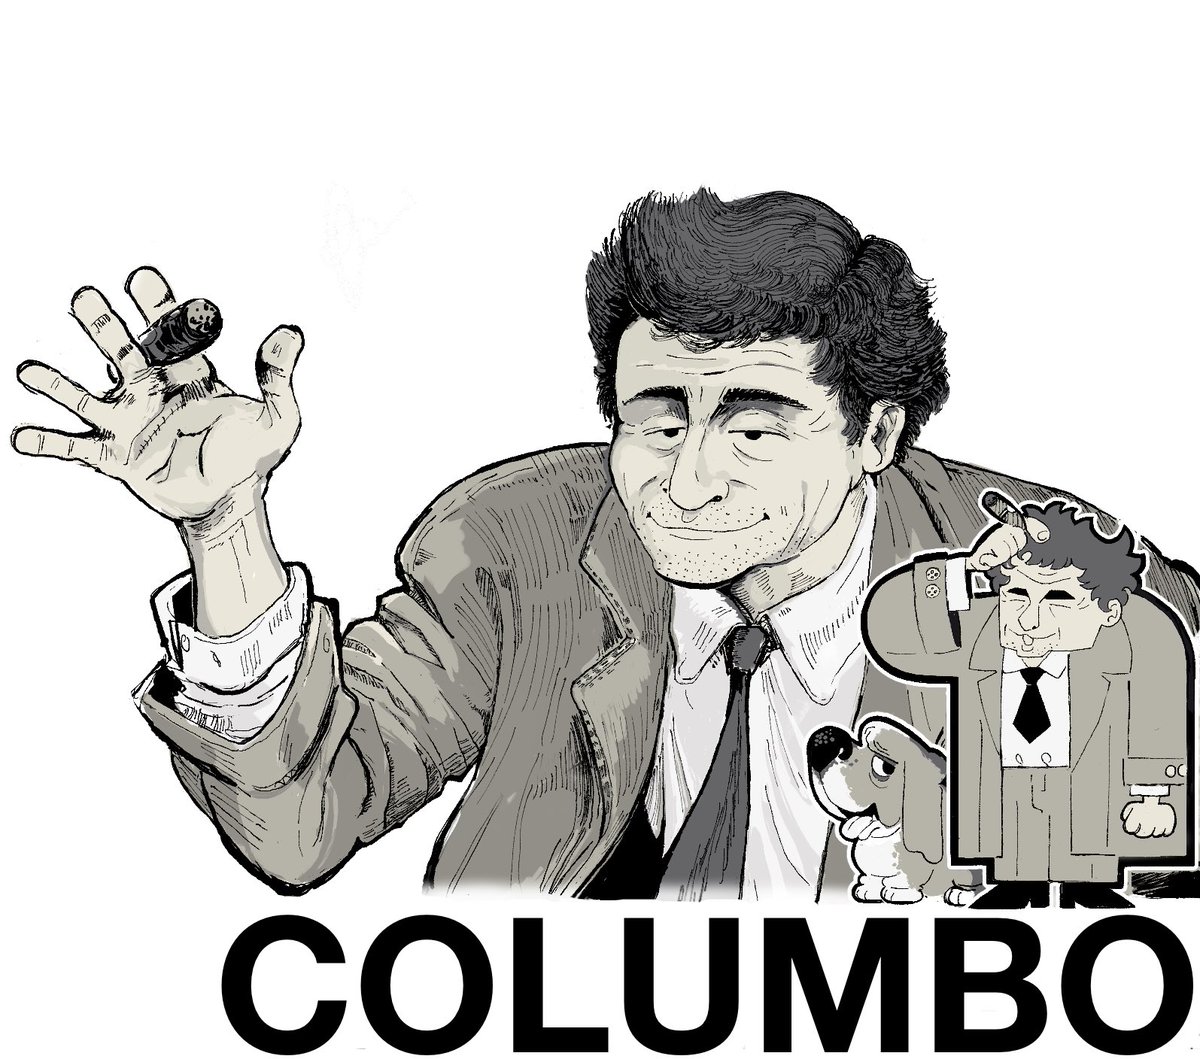 Columbo study that sort of morphed into a fucked up caricature the more I worked on it.